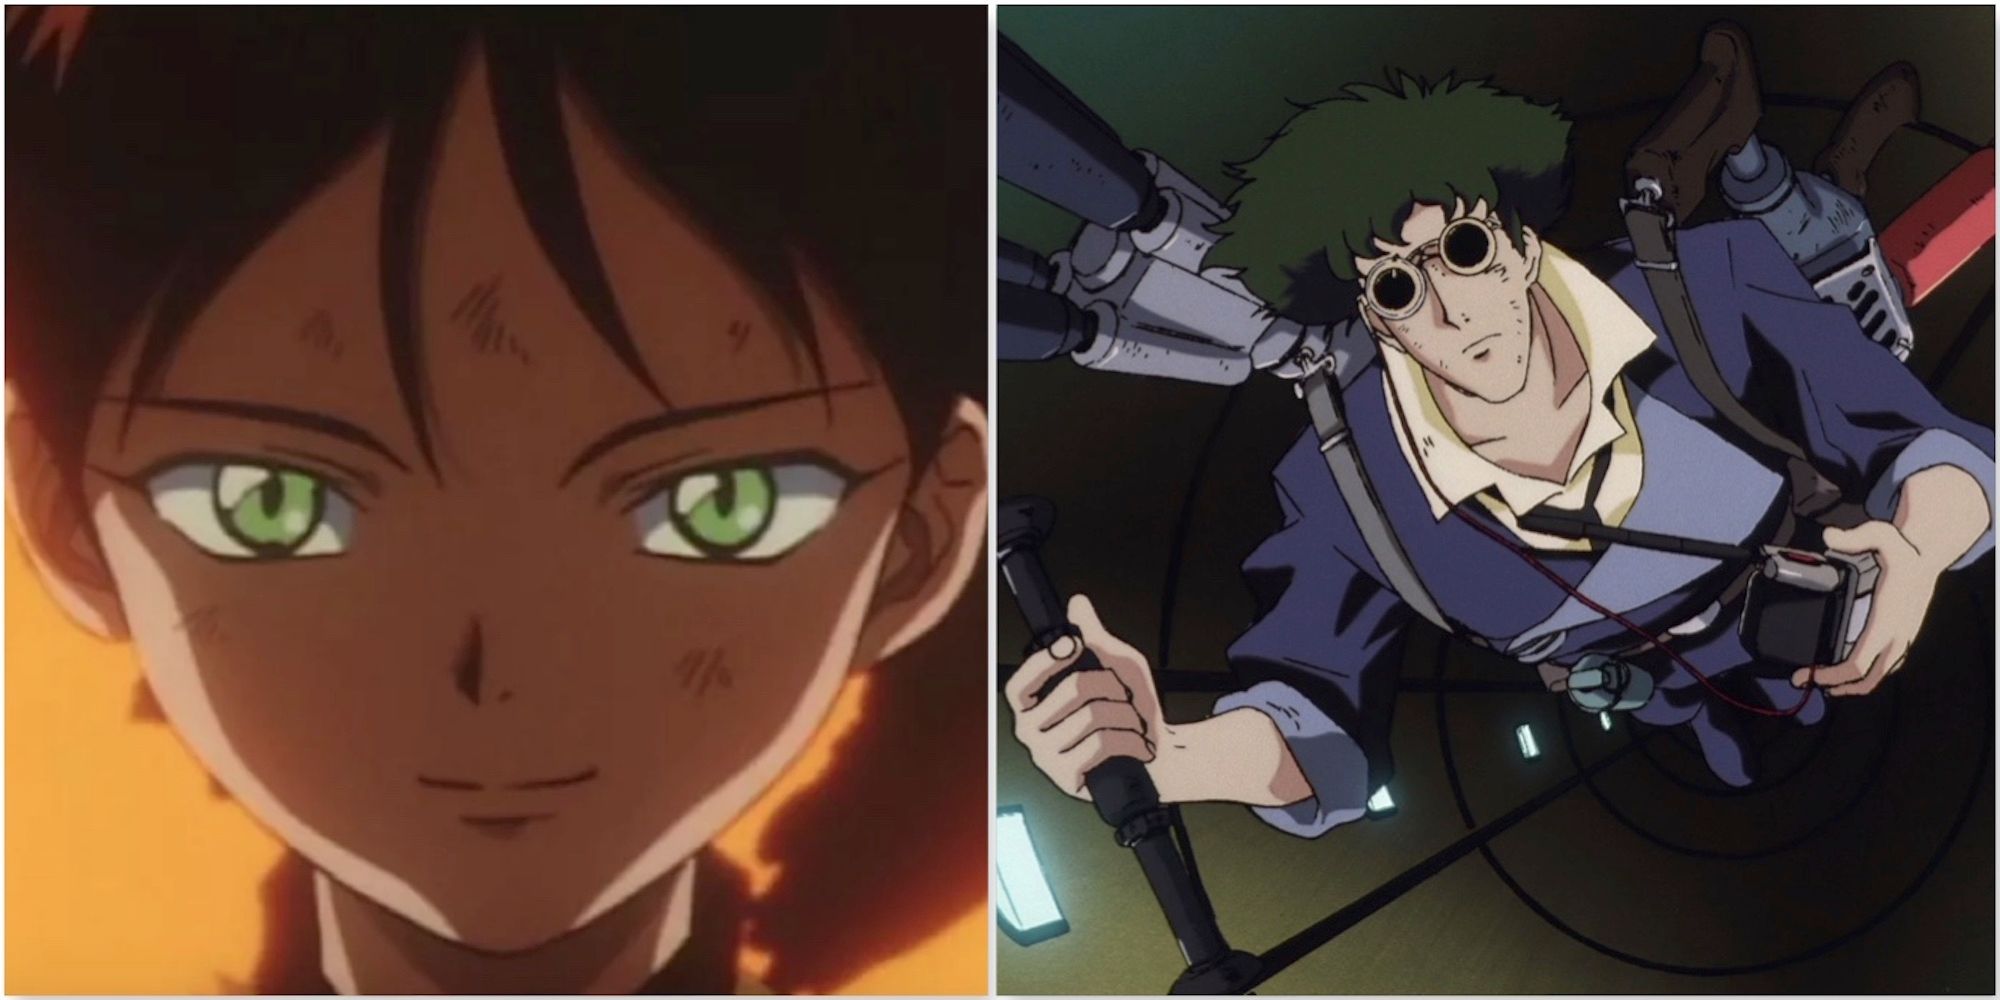 Wen and Spike from Cowboy Bebop